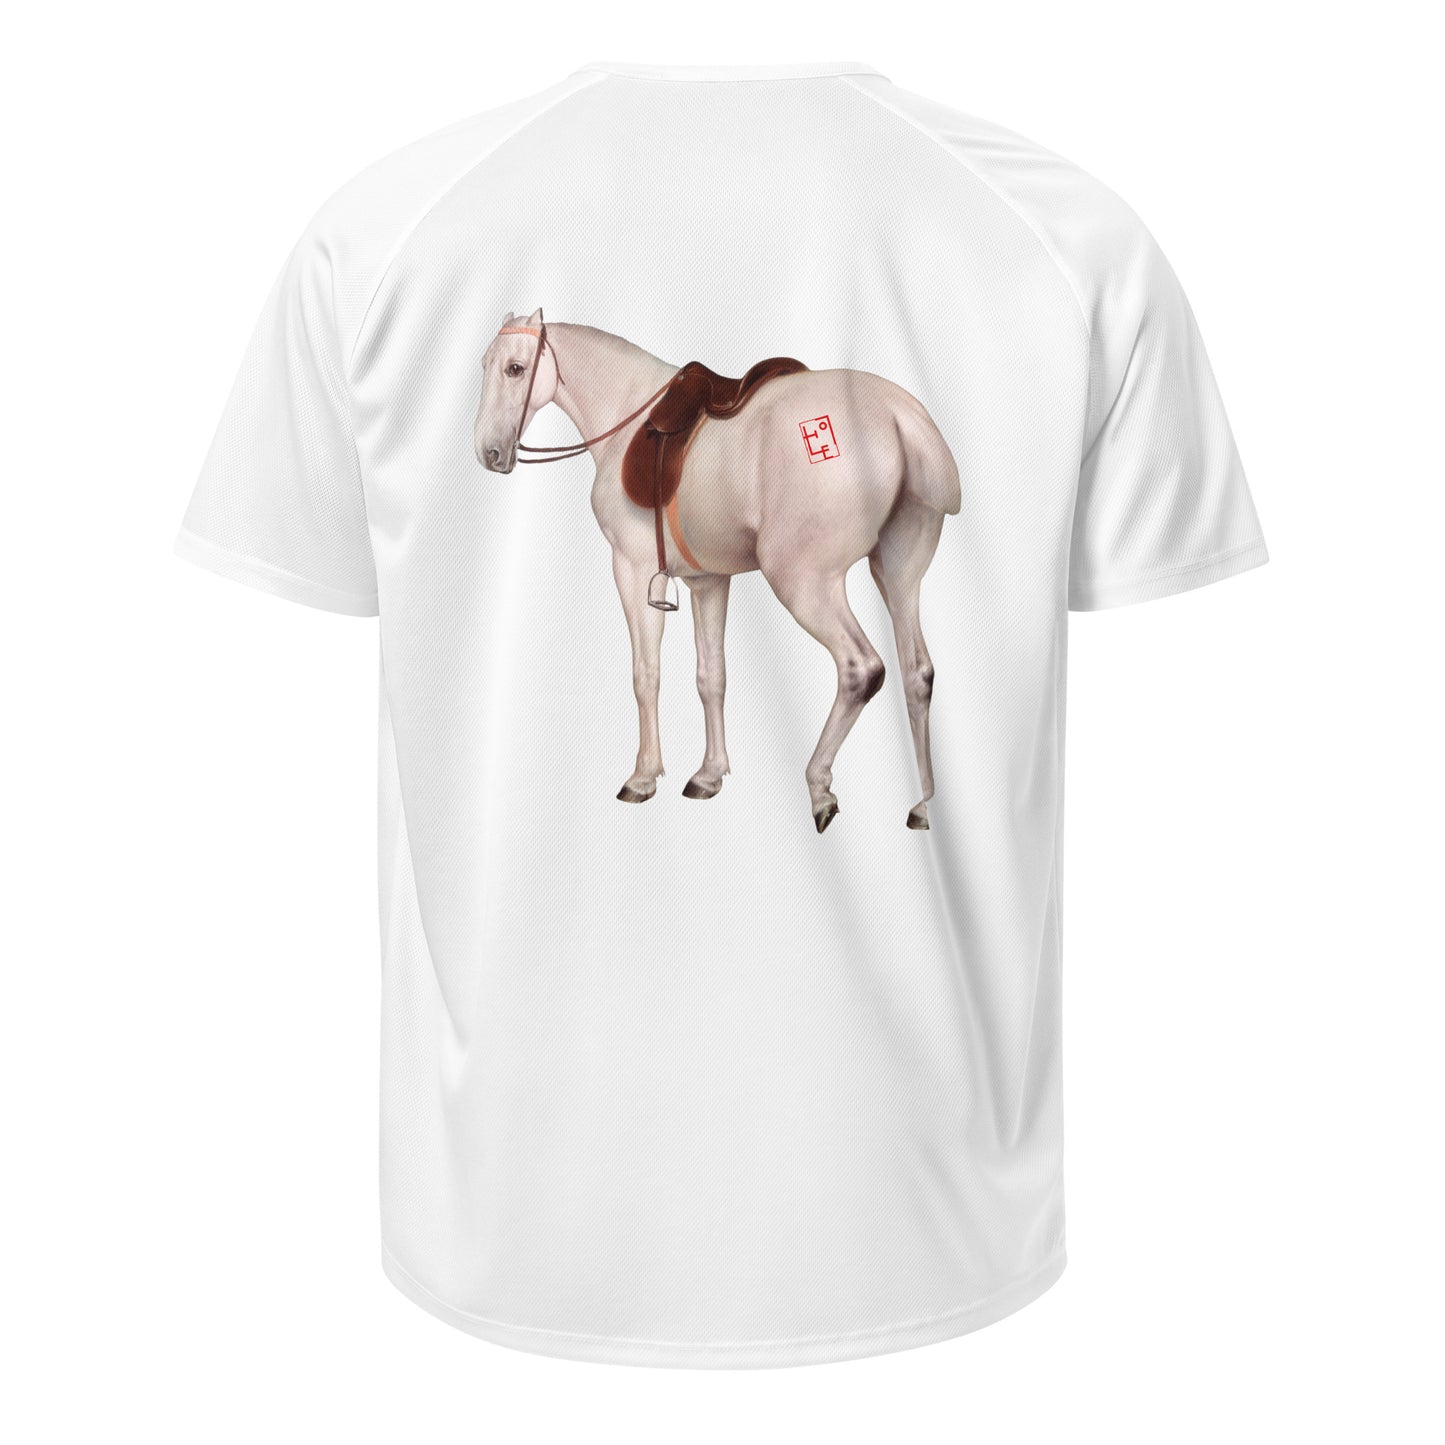 HORSE sports jersey